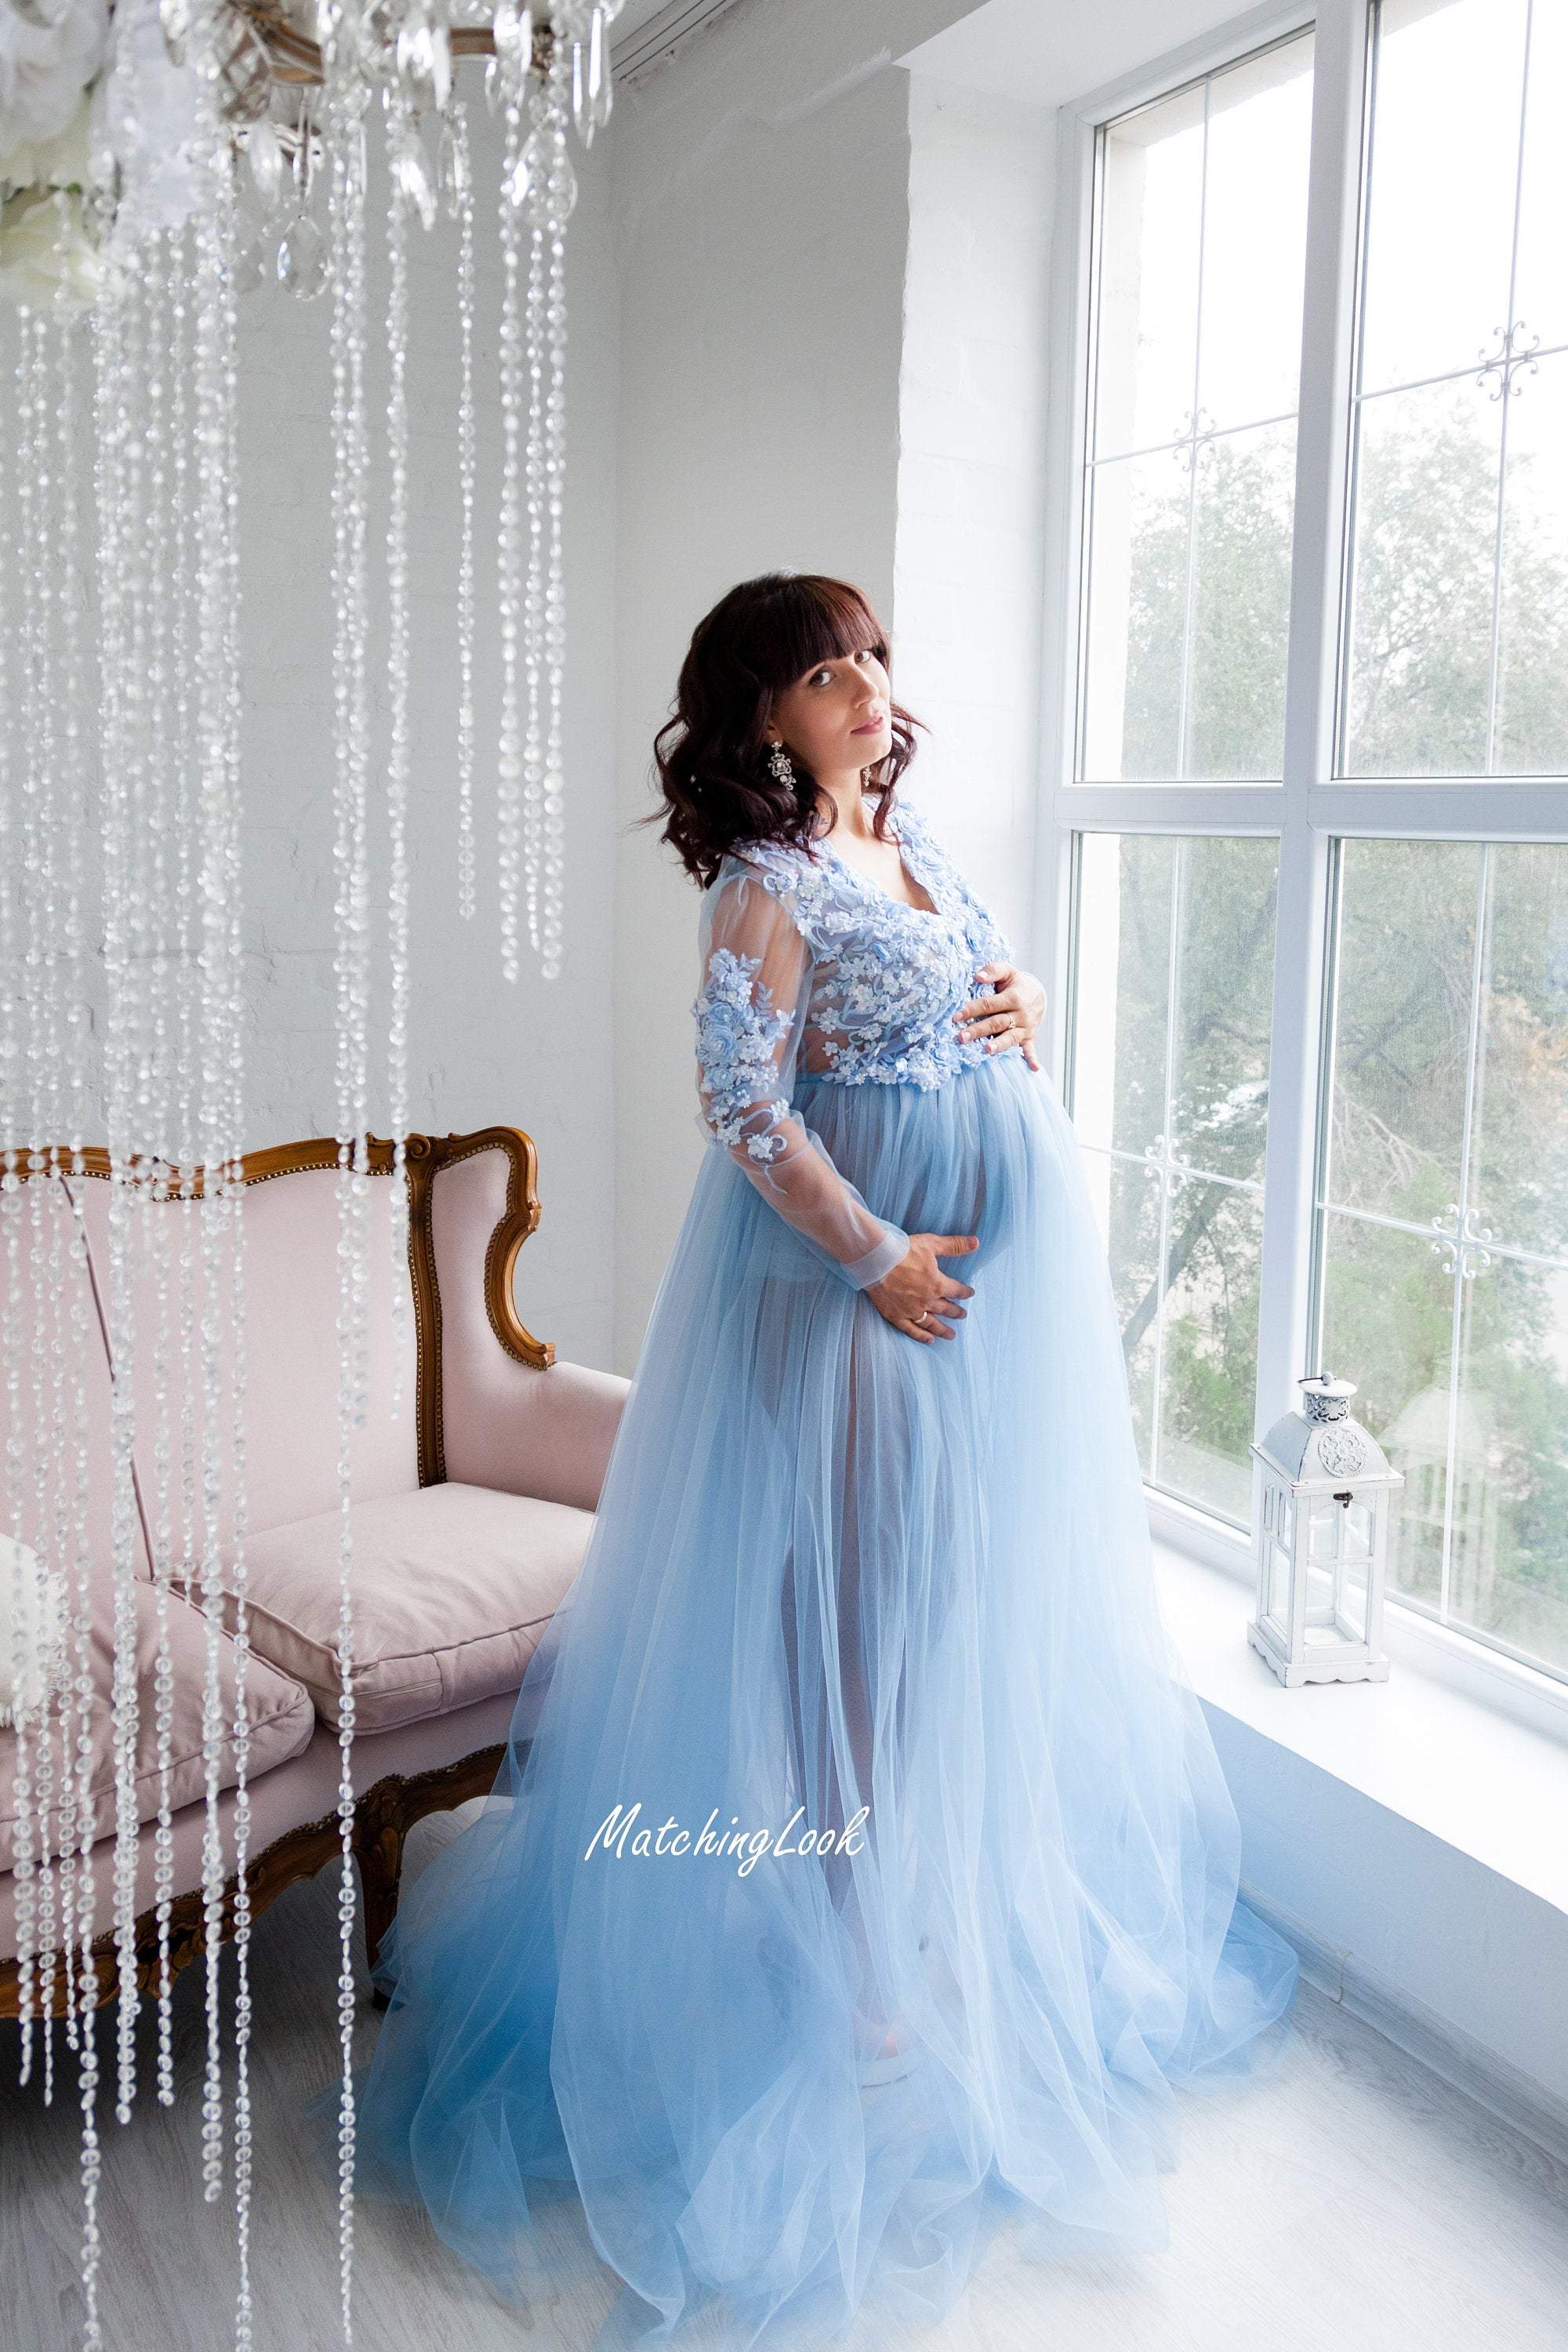 Best Pregnancy Dresses and Maternity Clothes in Singapore